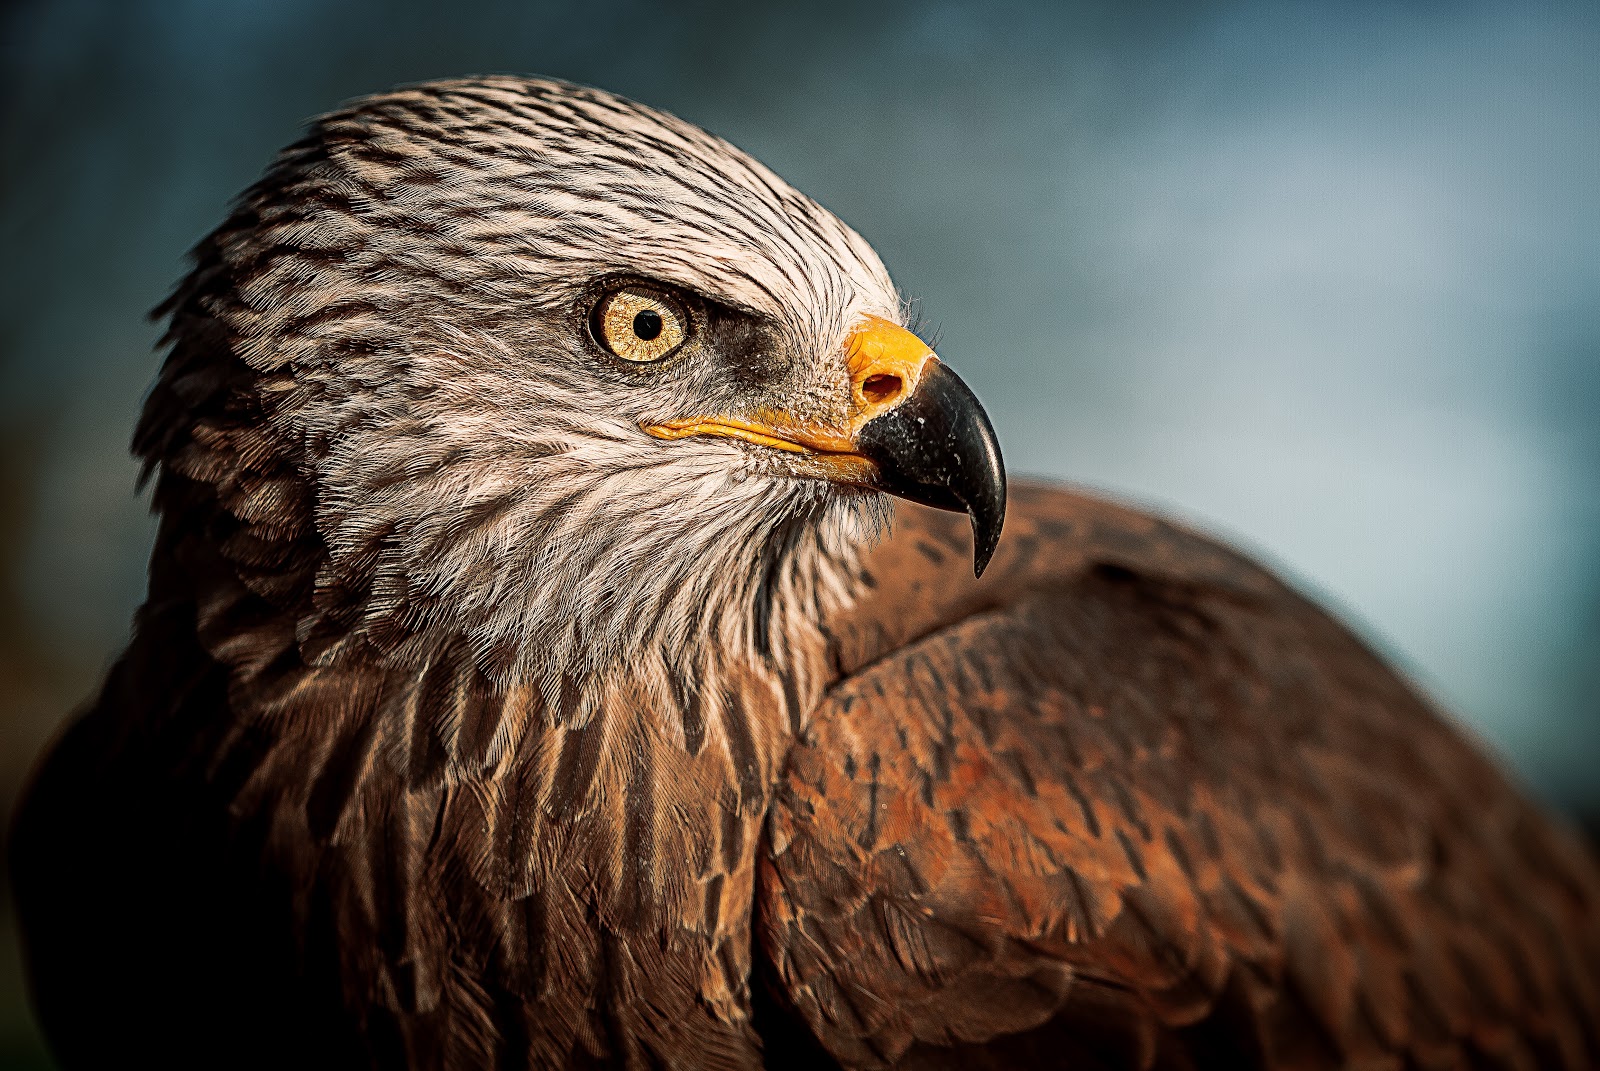 Close-up of a bird of prey from a profile view